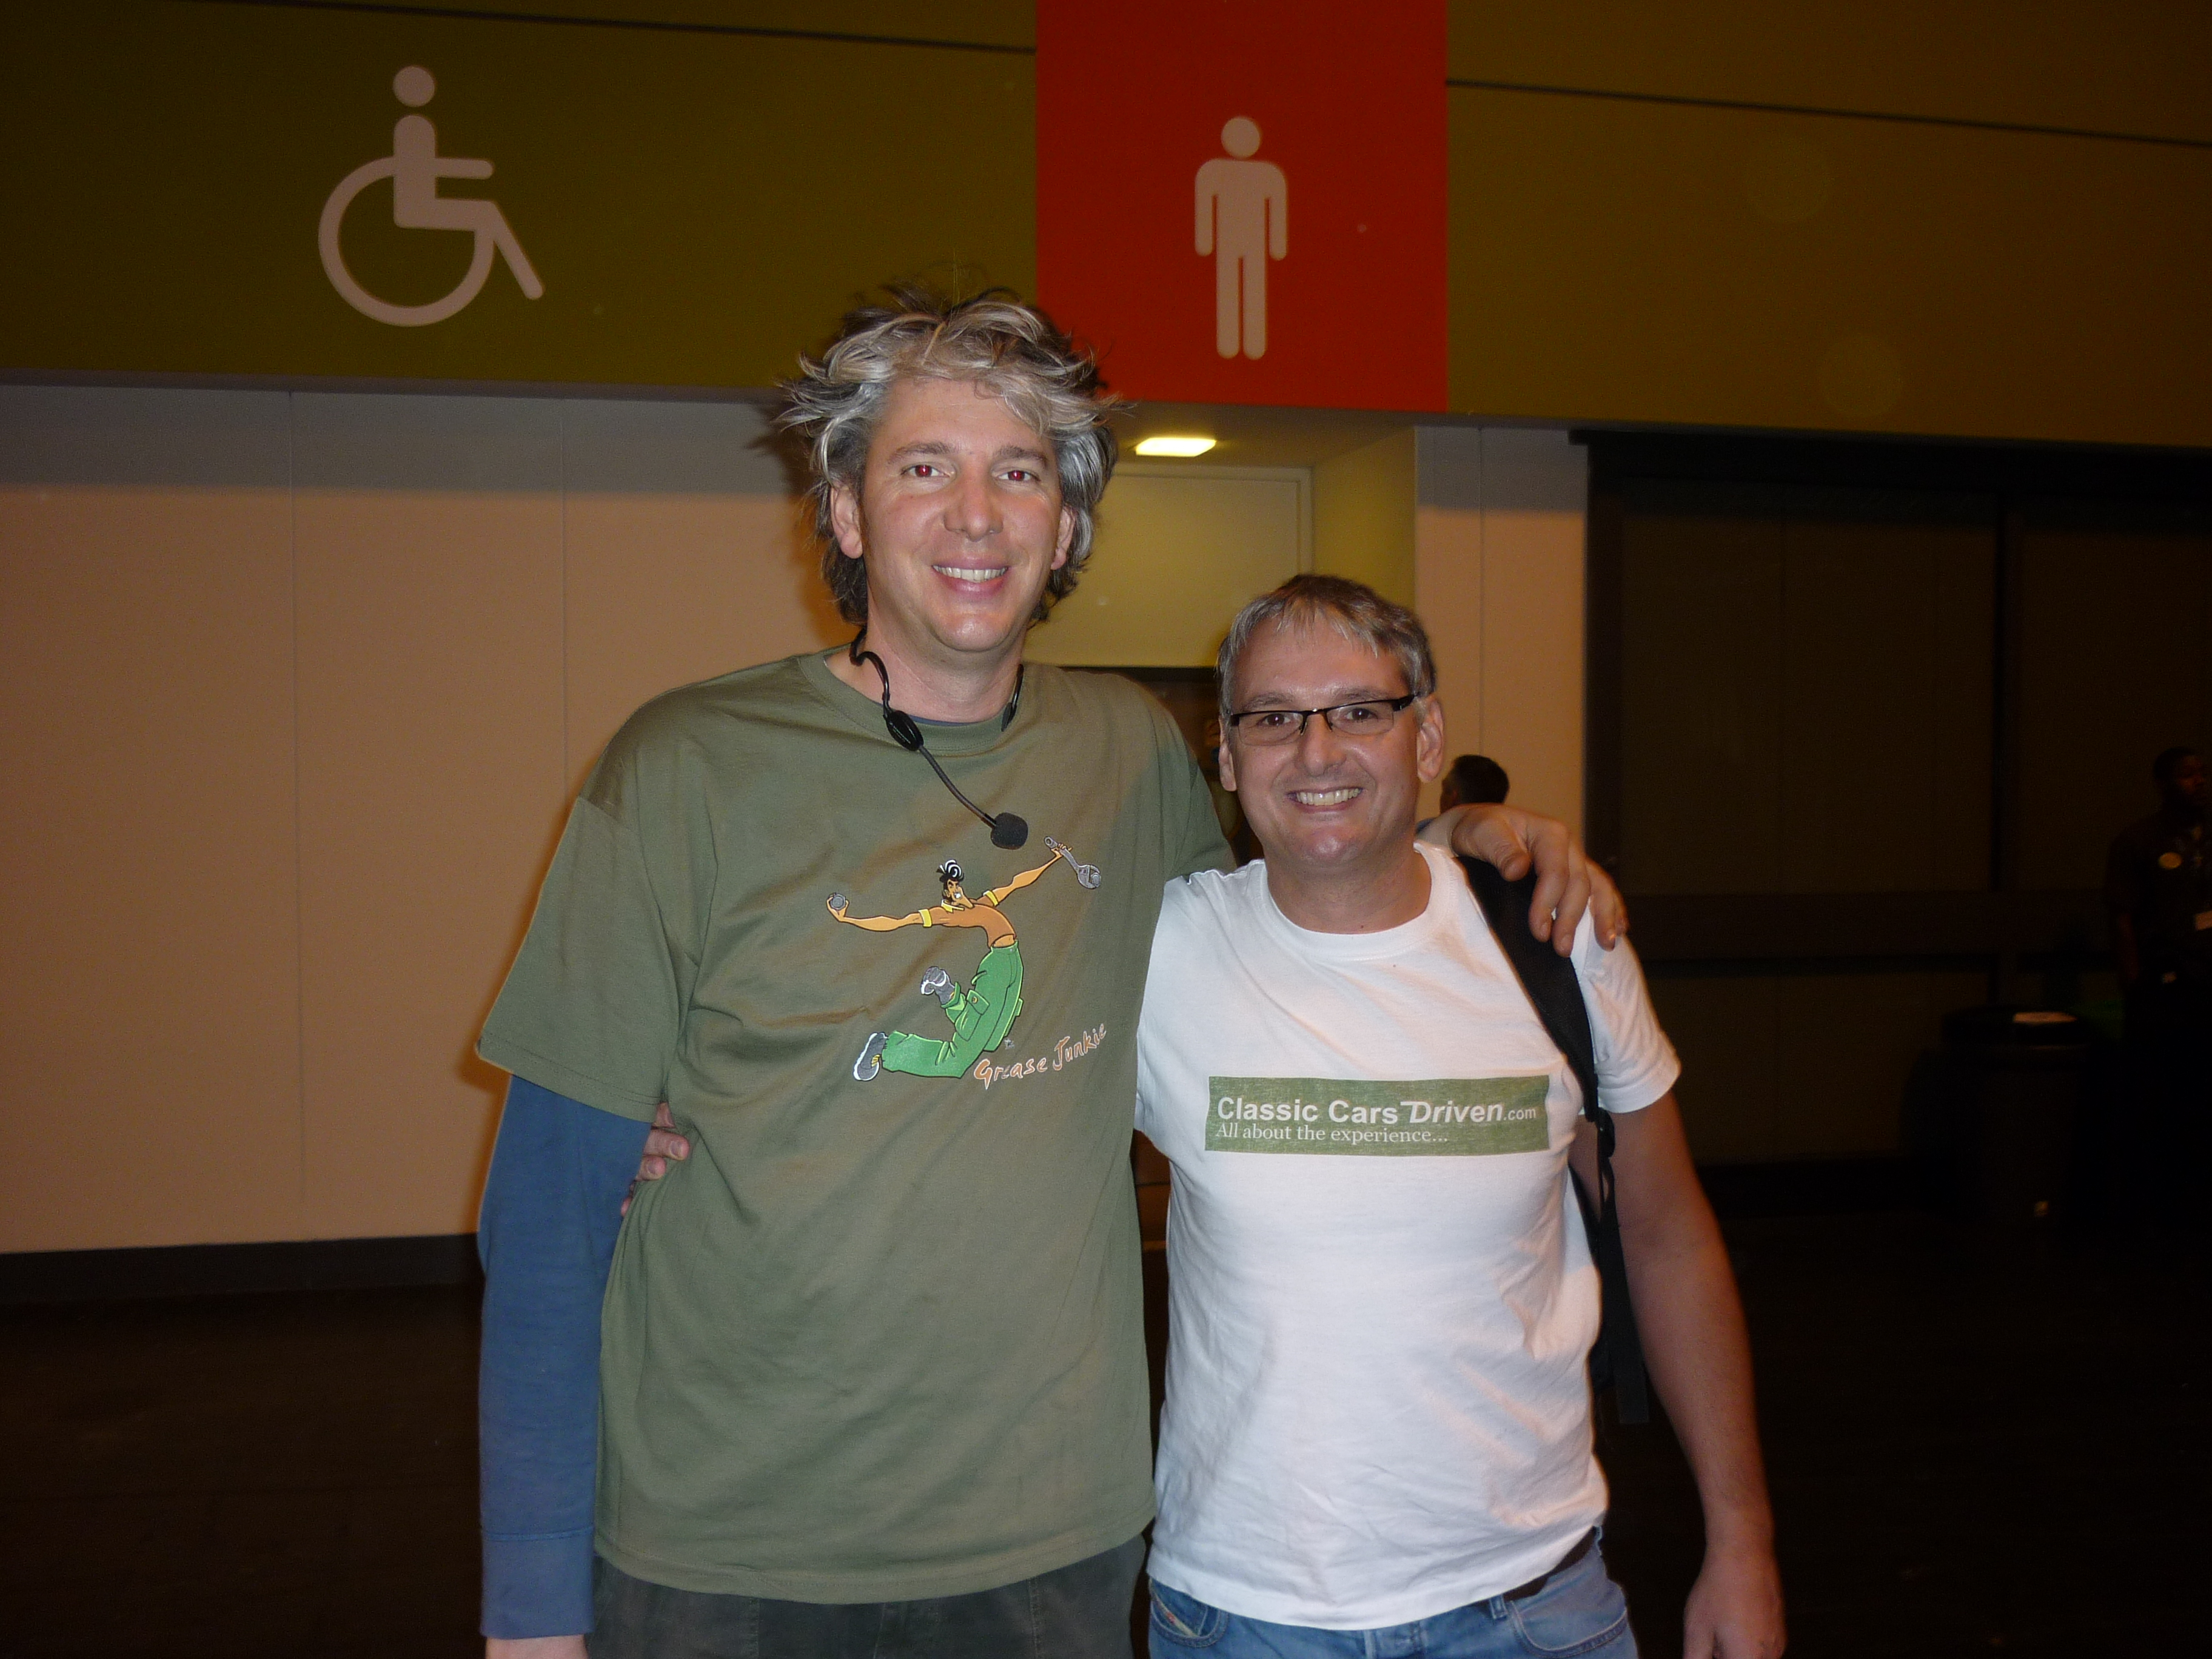 Edd China is a giant in the Classic Car world